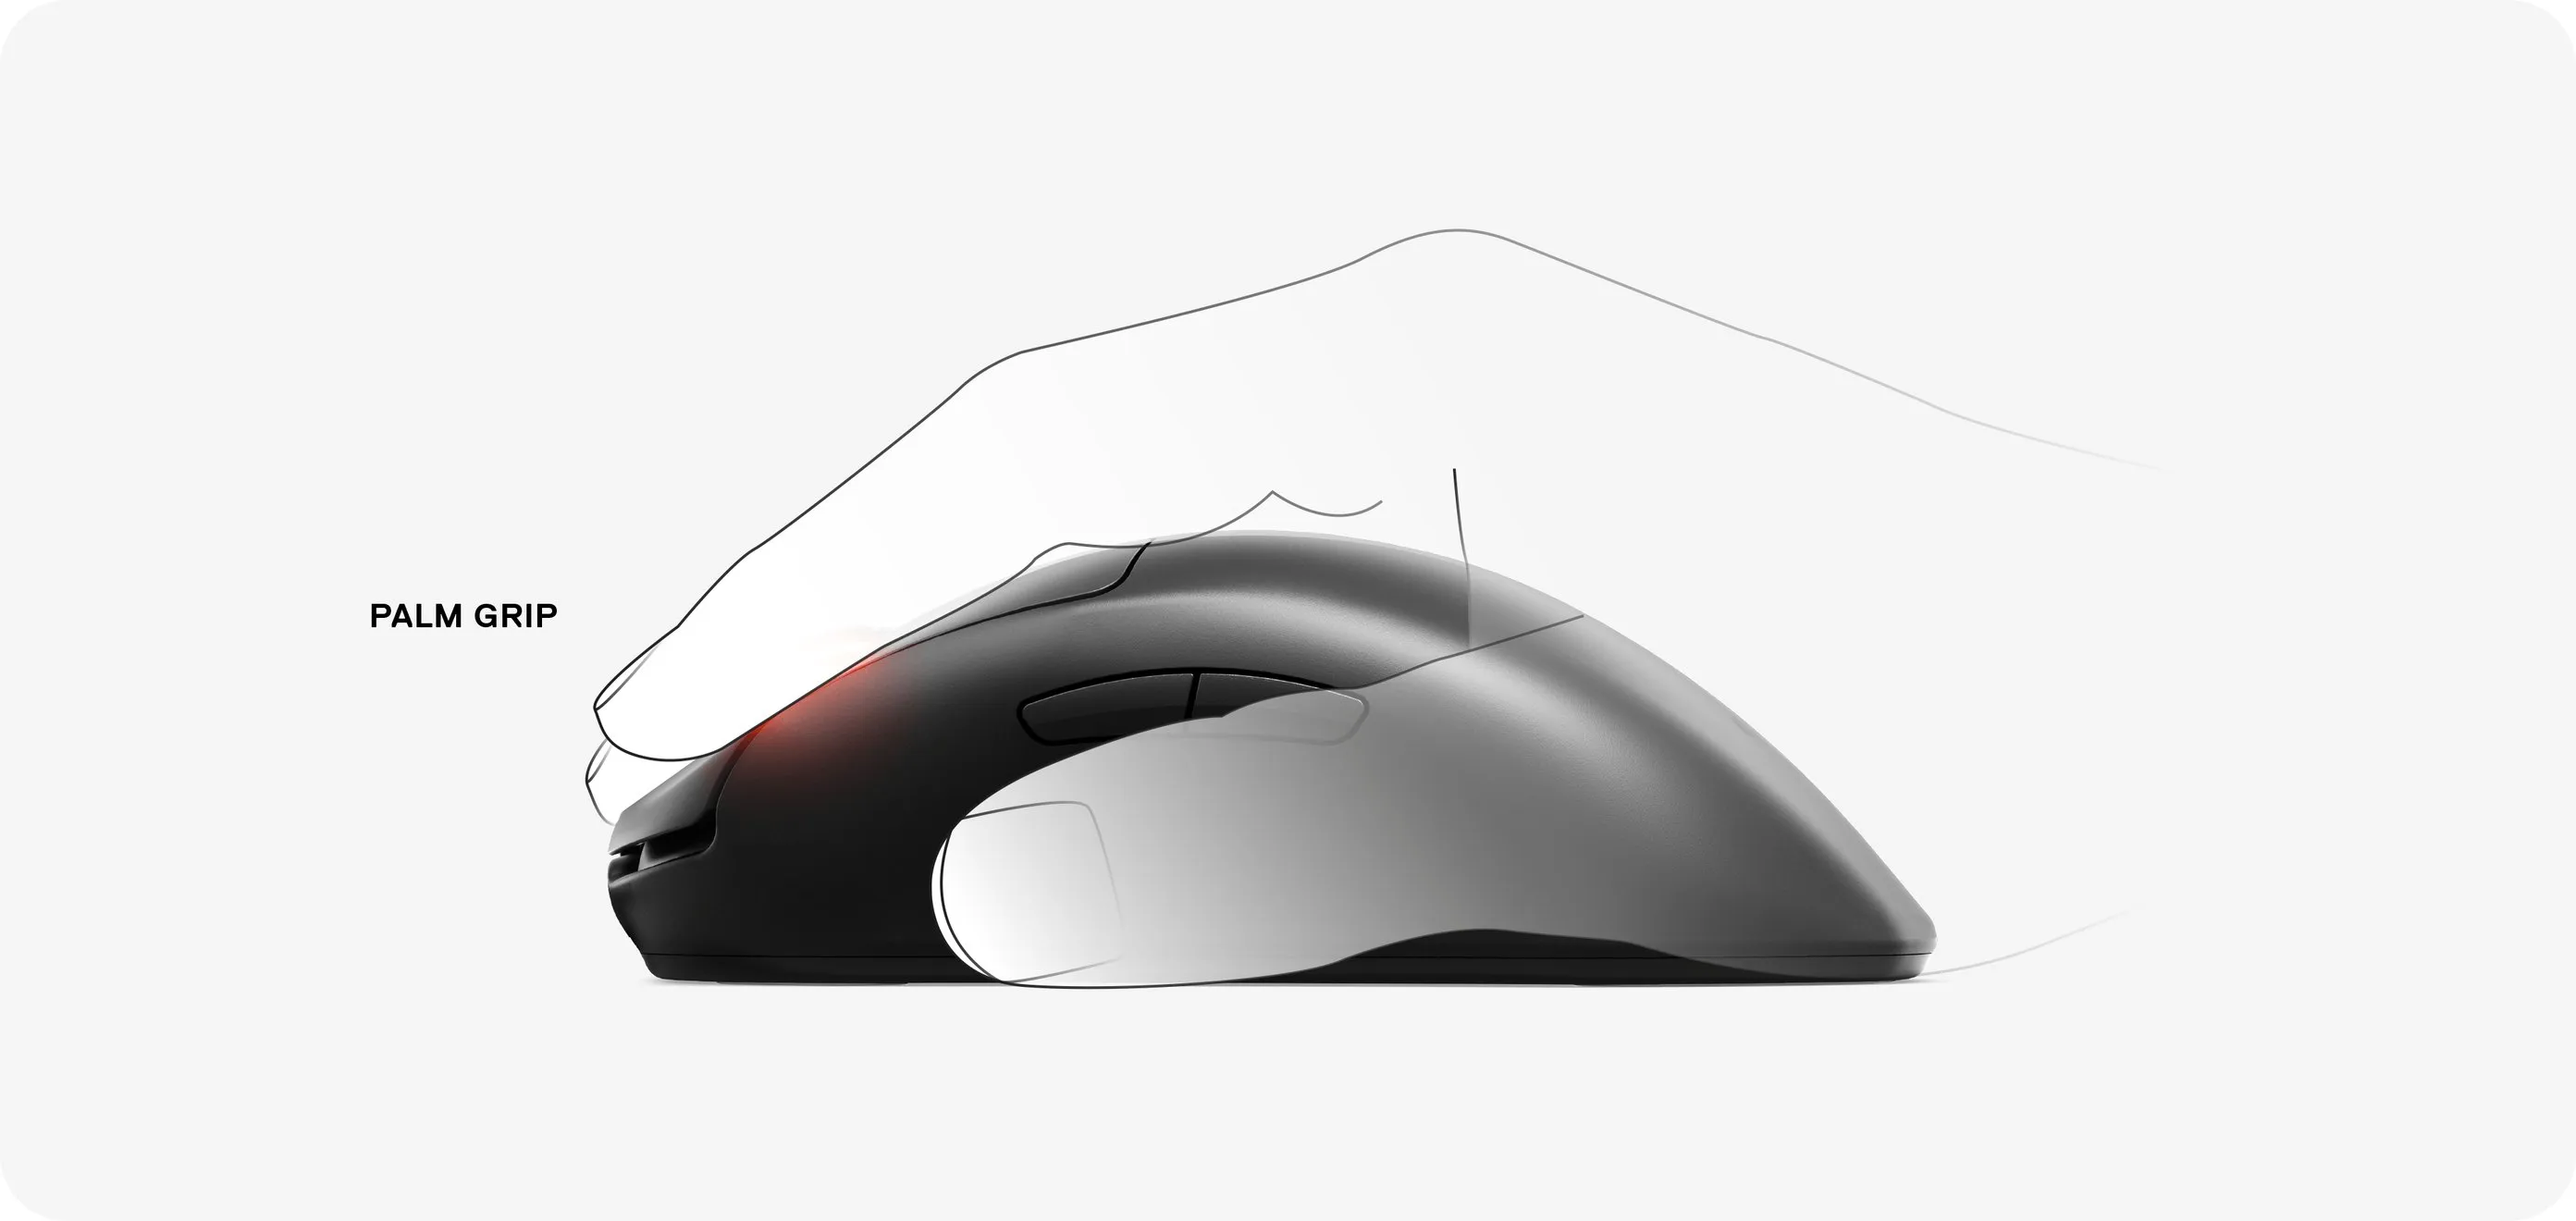 SteelSeries Prime Wireless gaming mouse Ǻ